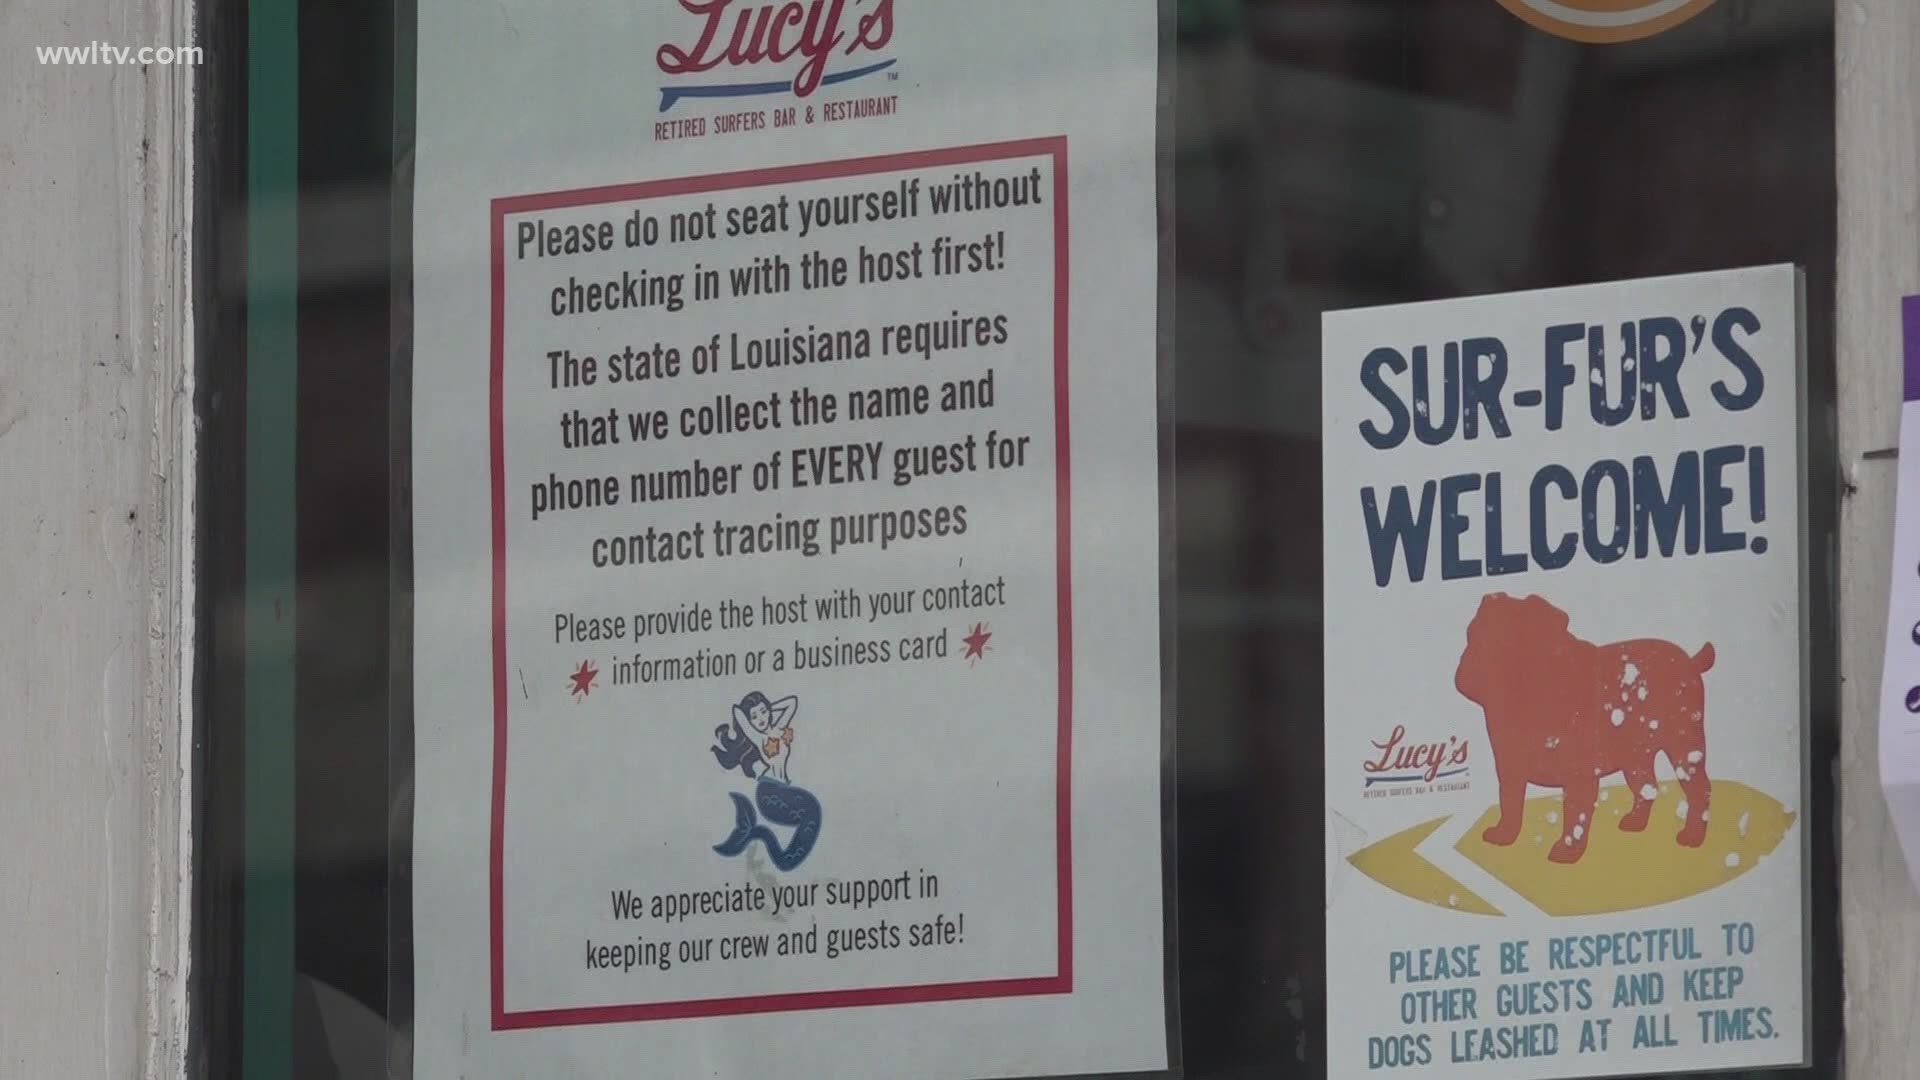 Lucy's Retired Surfers Bar and Restaurant closed too after an employee tested positive Thursday.